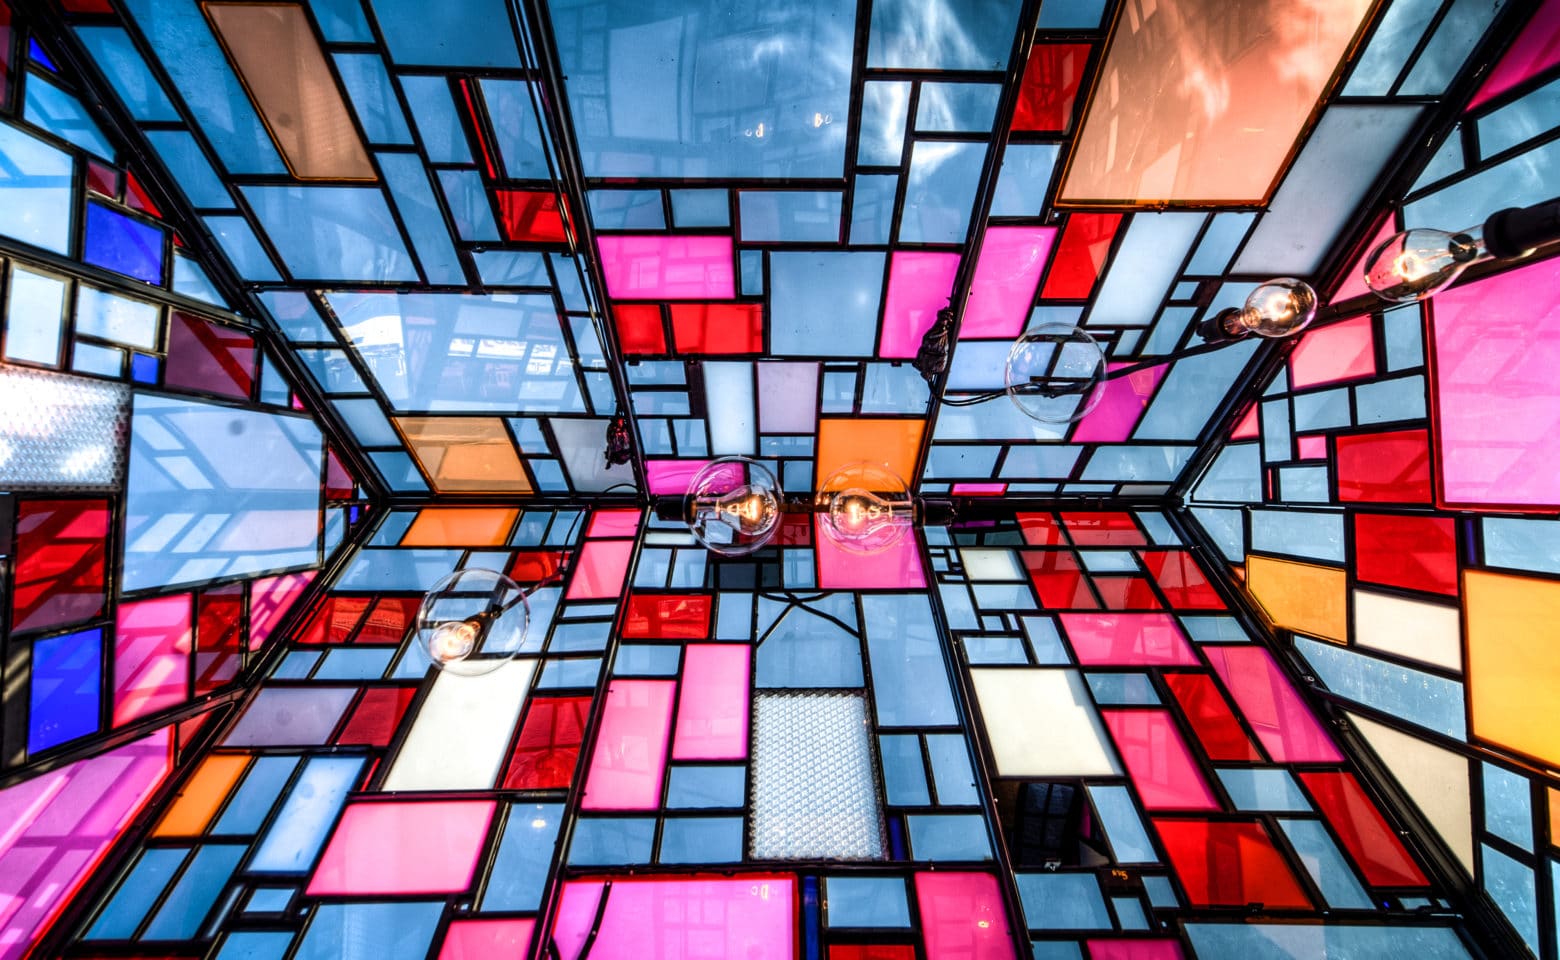 Inside a stained glass house by Tom Fruin